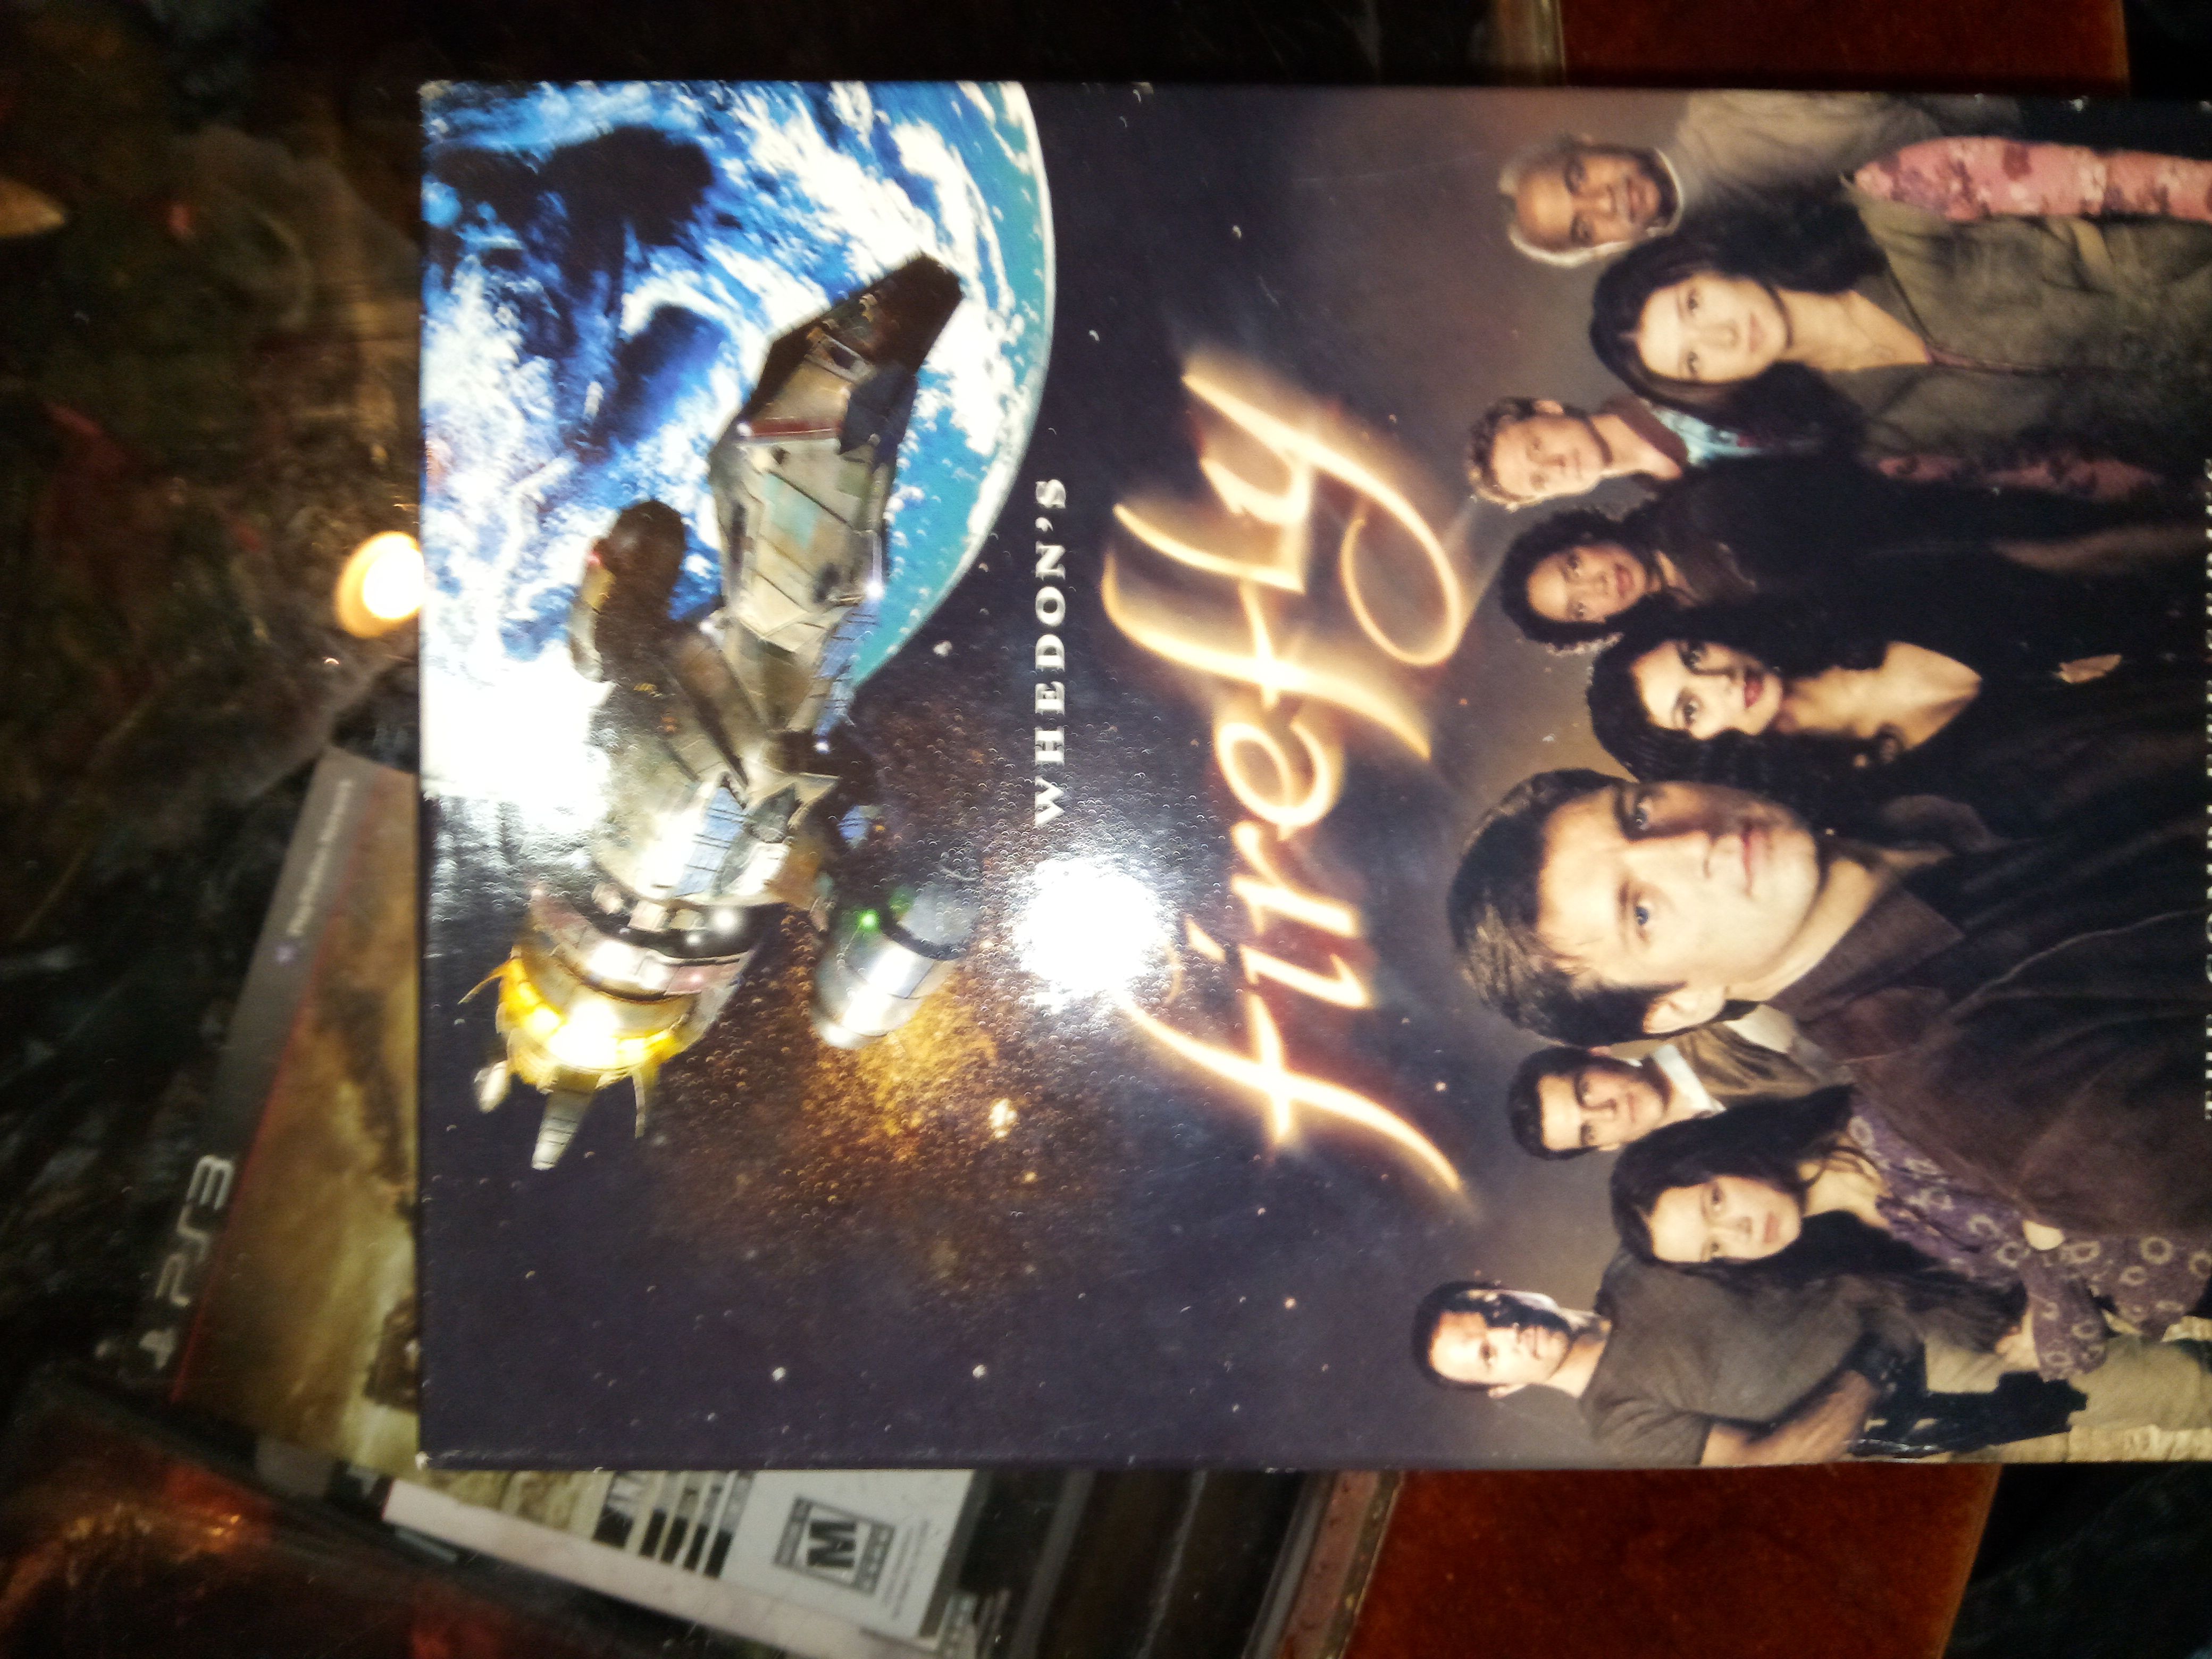 Firefly complete series